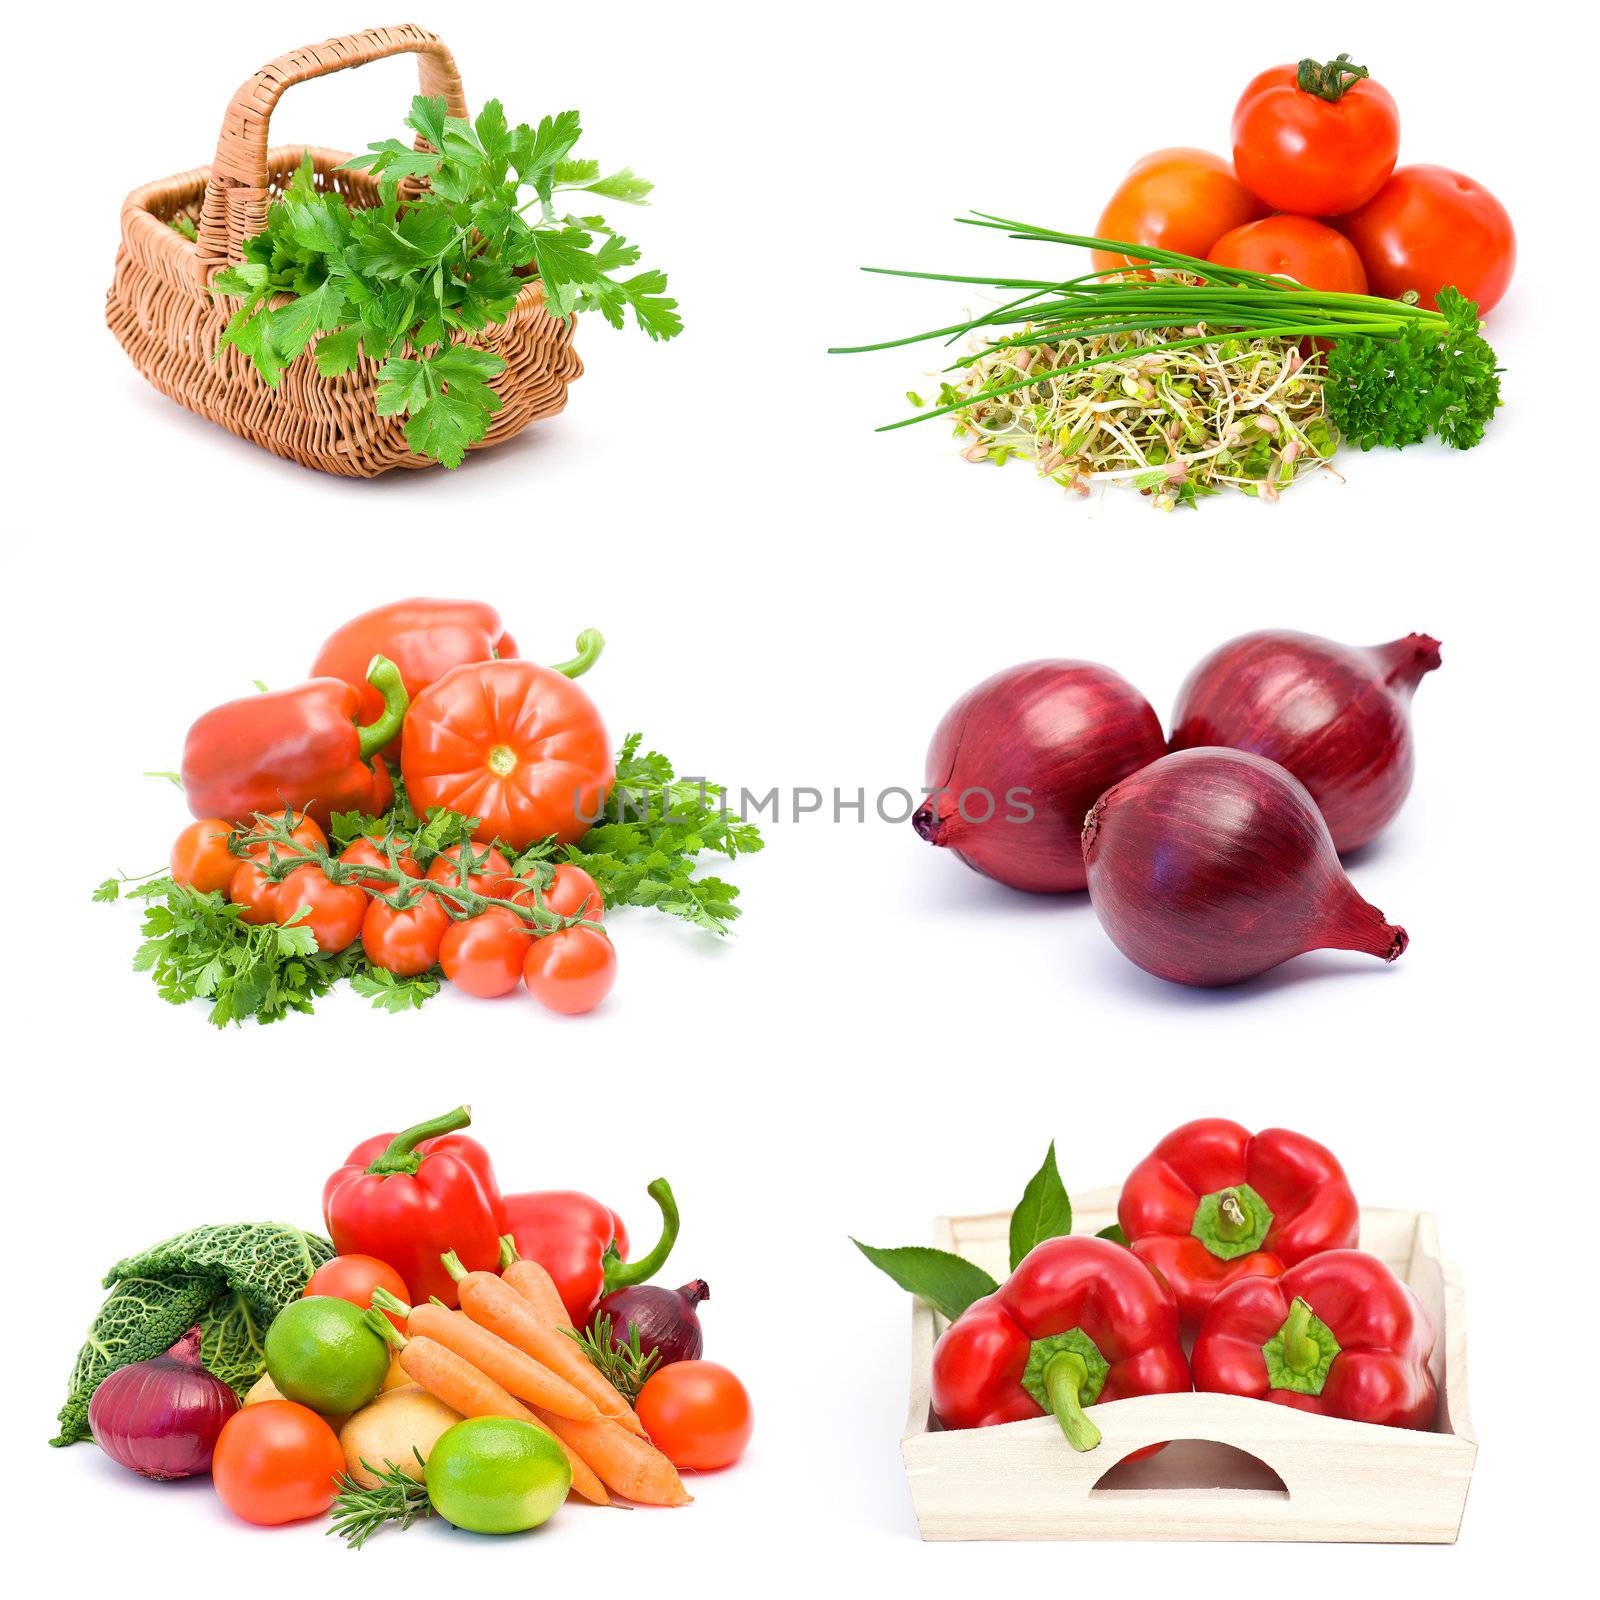 vegetables collection by miradrozdowski